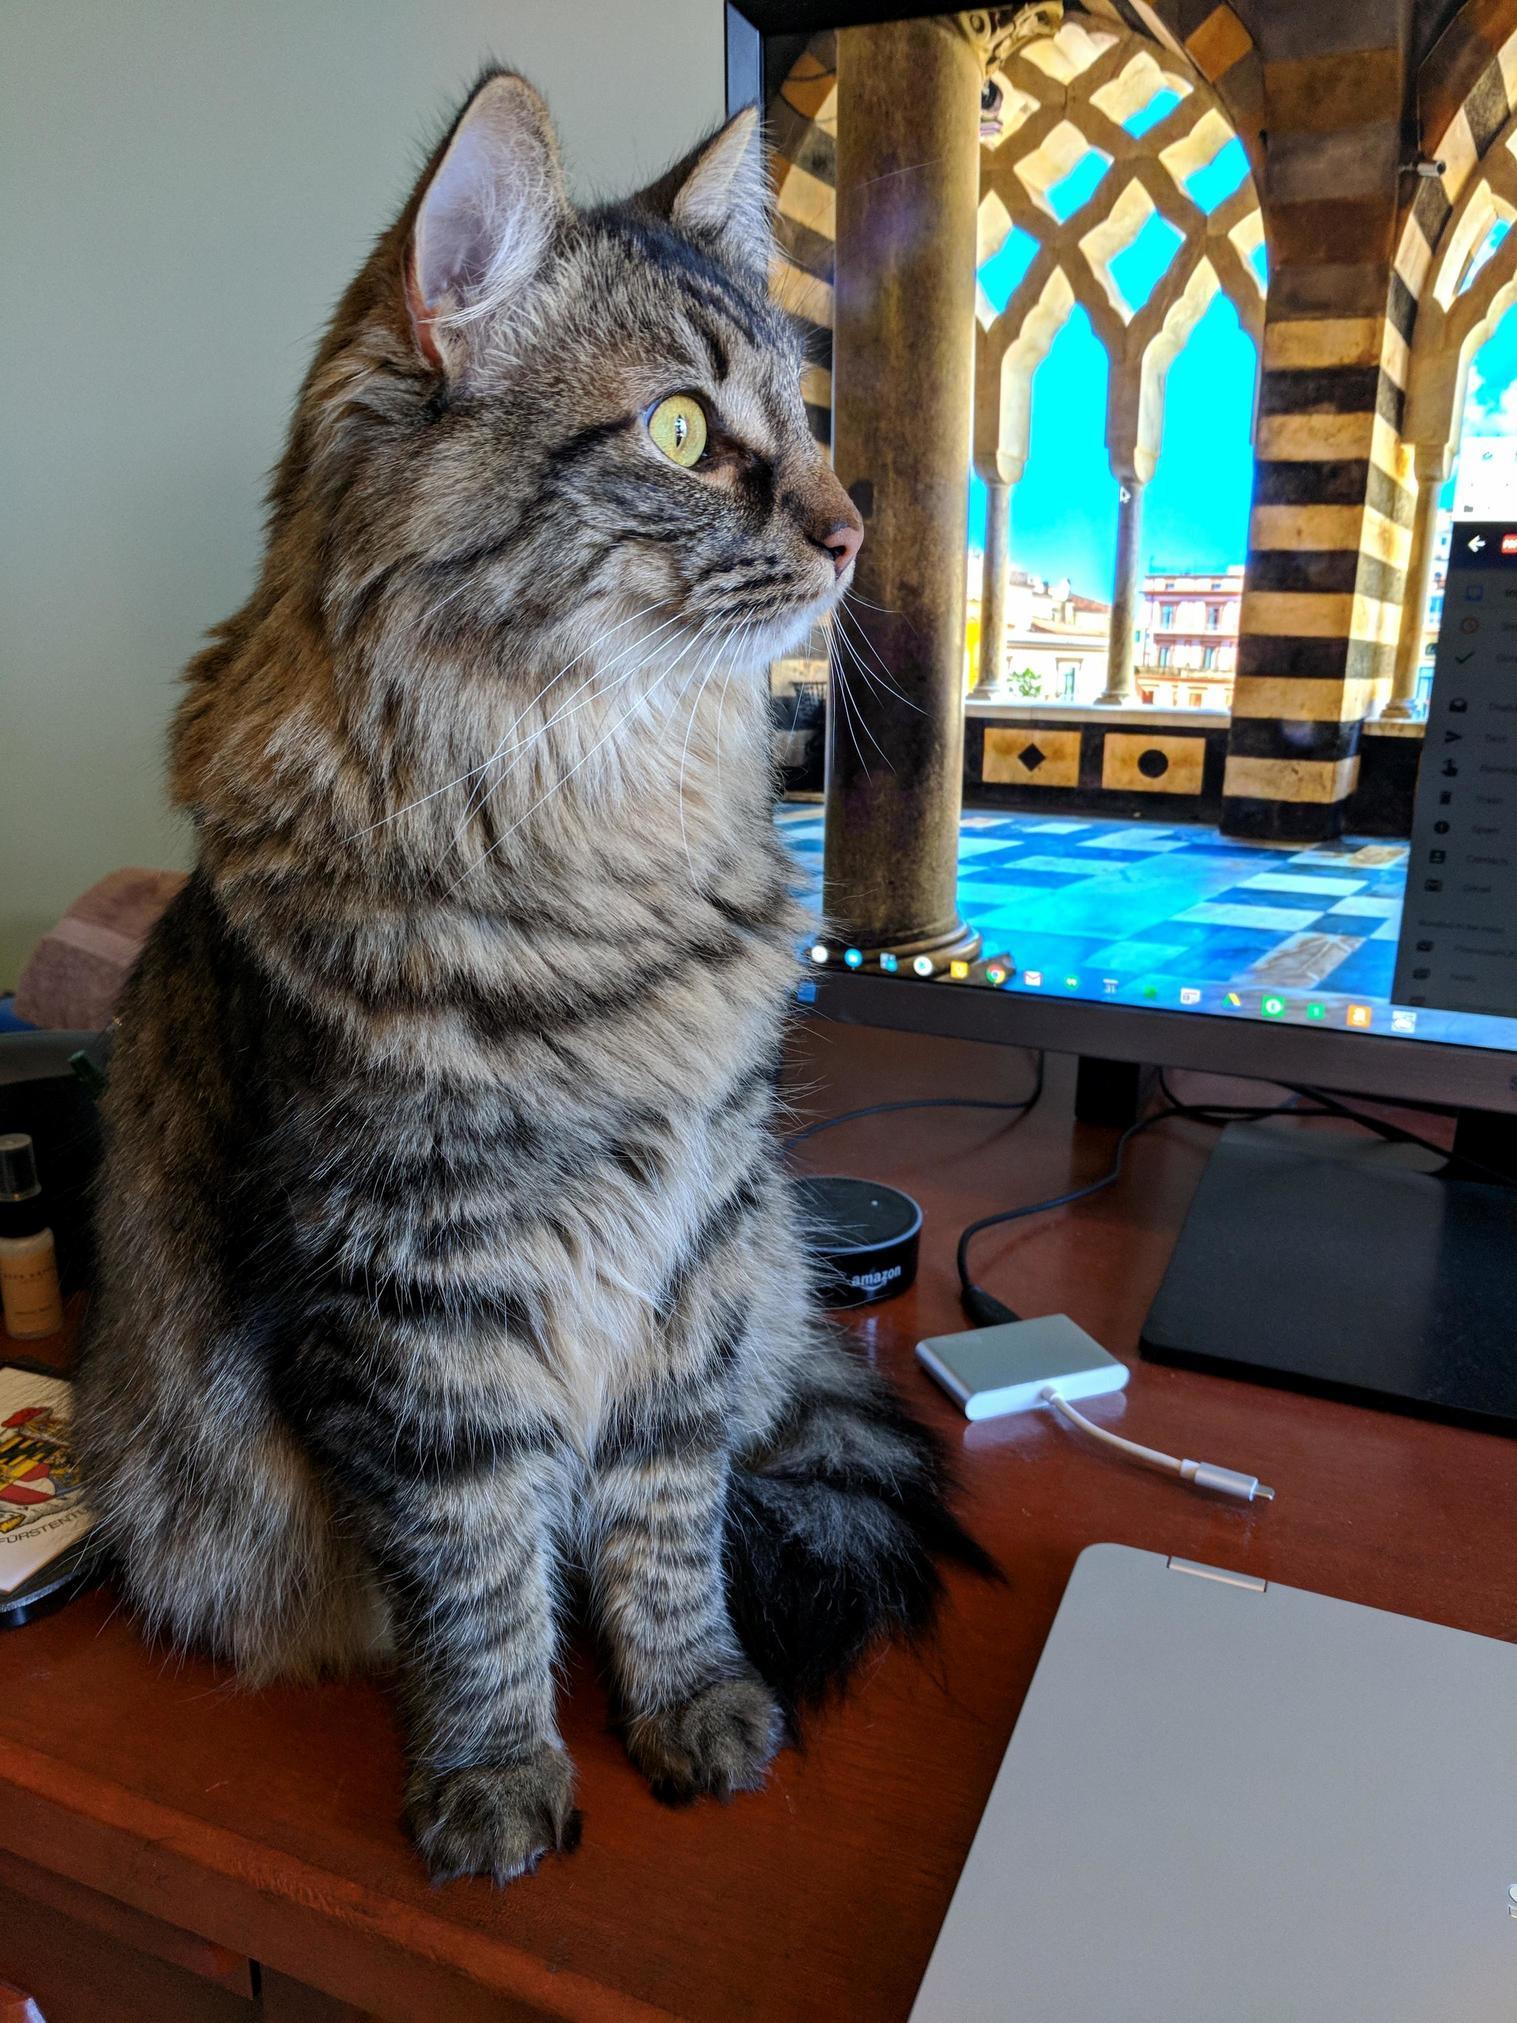 Six weeks with this pretty maine coon rescue. she helps me work. life is so good!